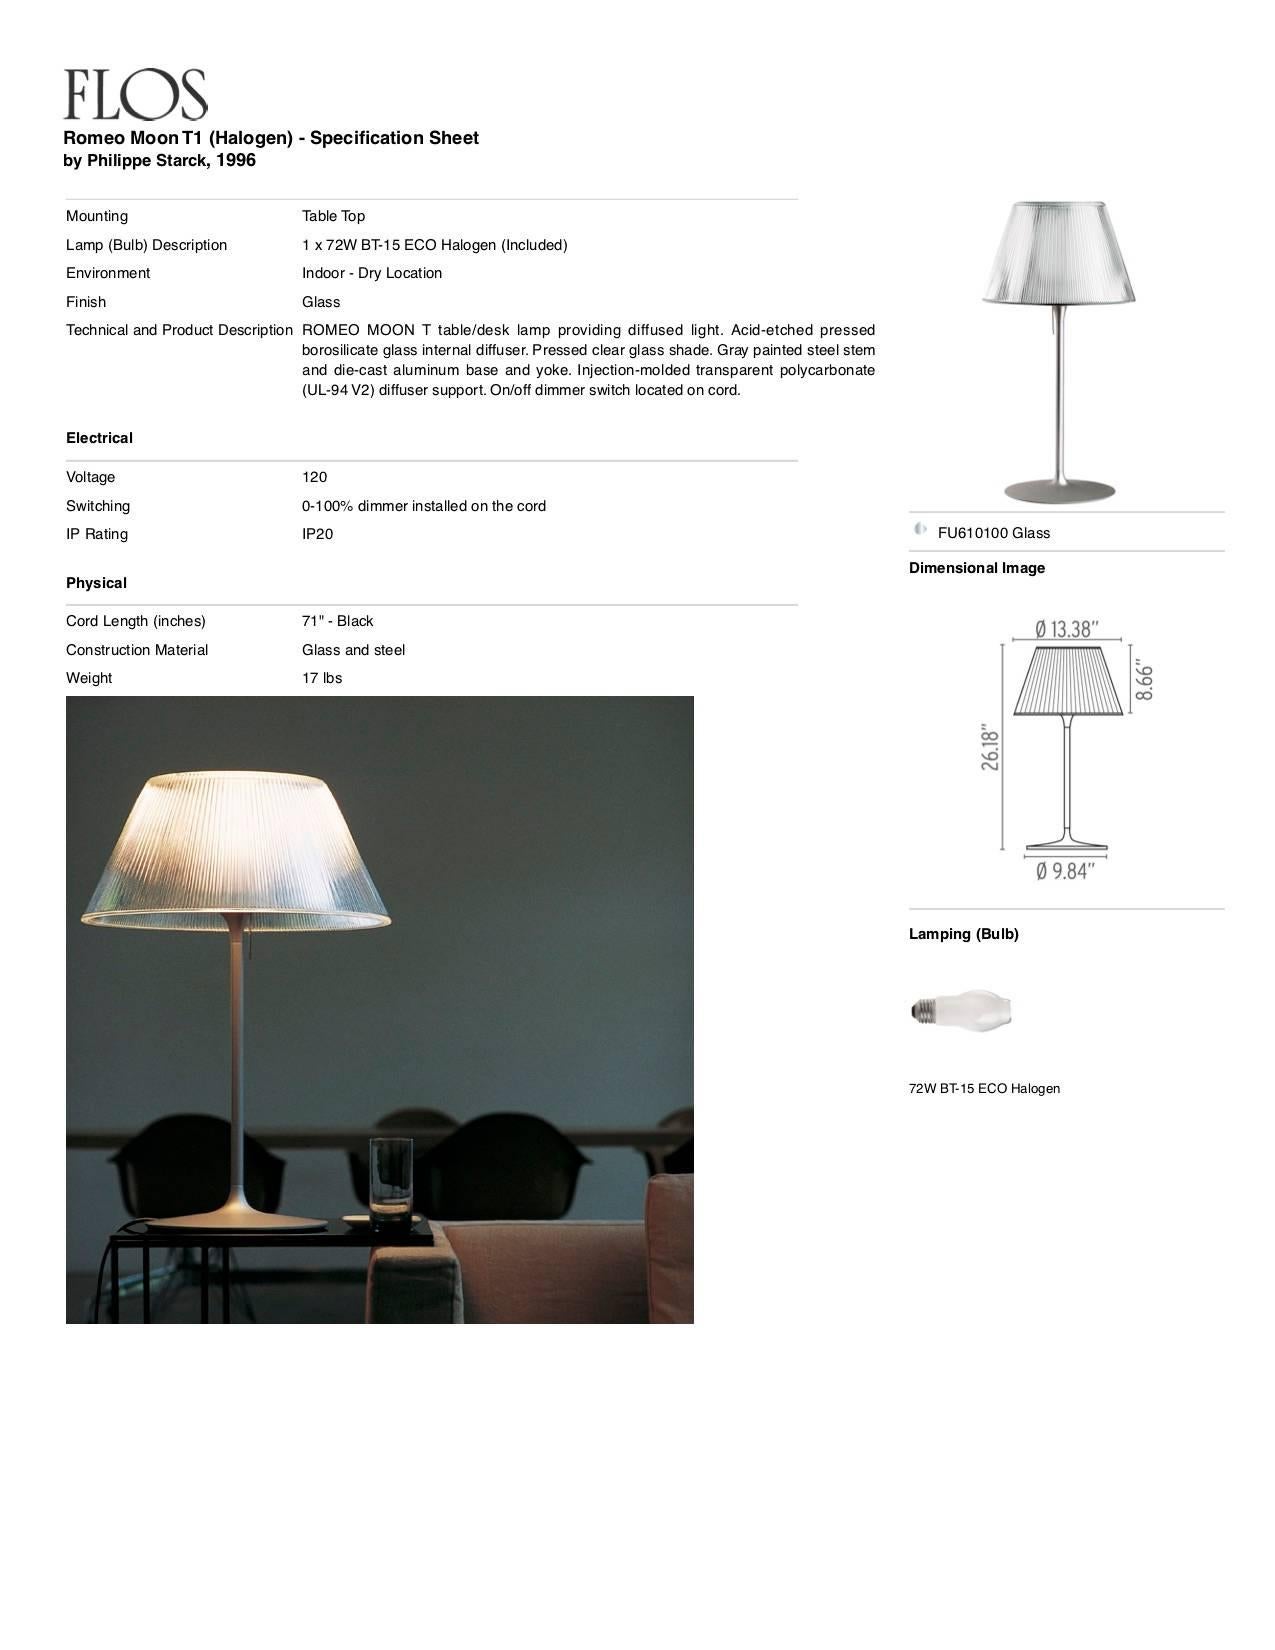 FLOS Romeo Moon T1 Halogen Table Lamp by Philippe Starck 1